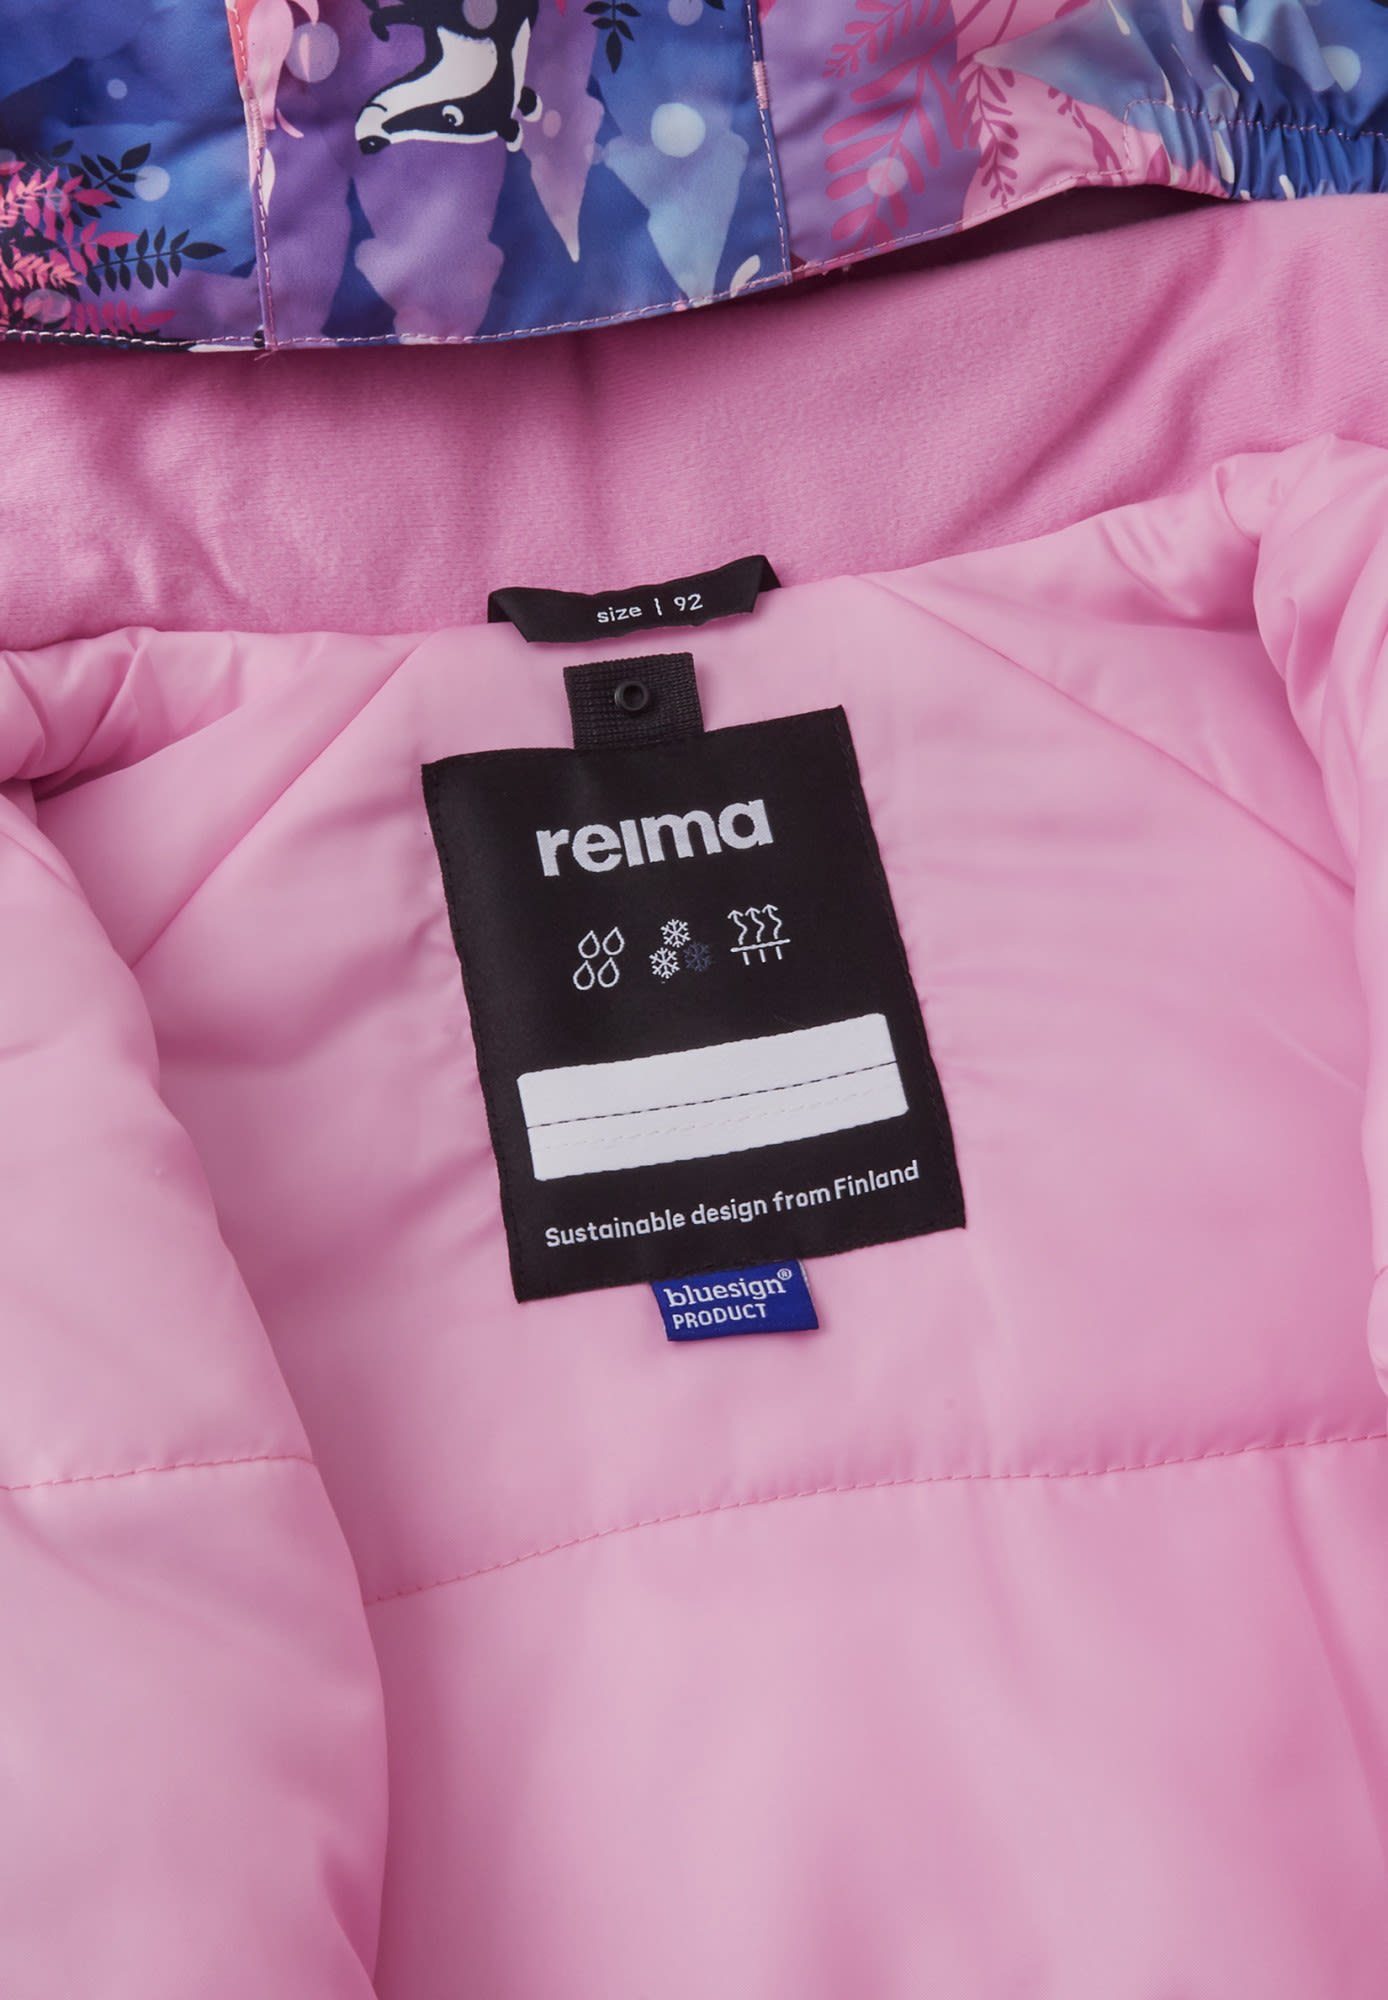 reima Overall Reima Overall Pink Langnes Classic Winter Toddlers Kinder